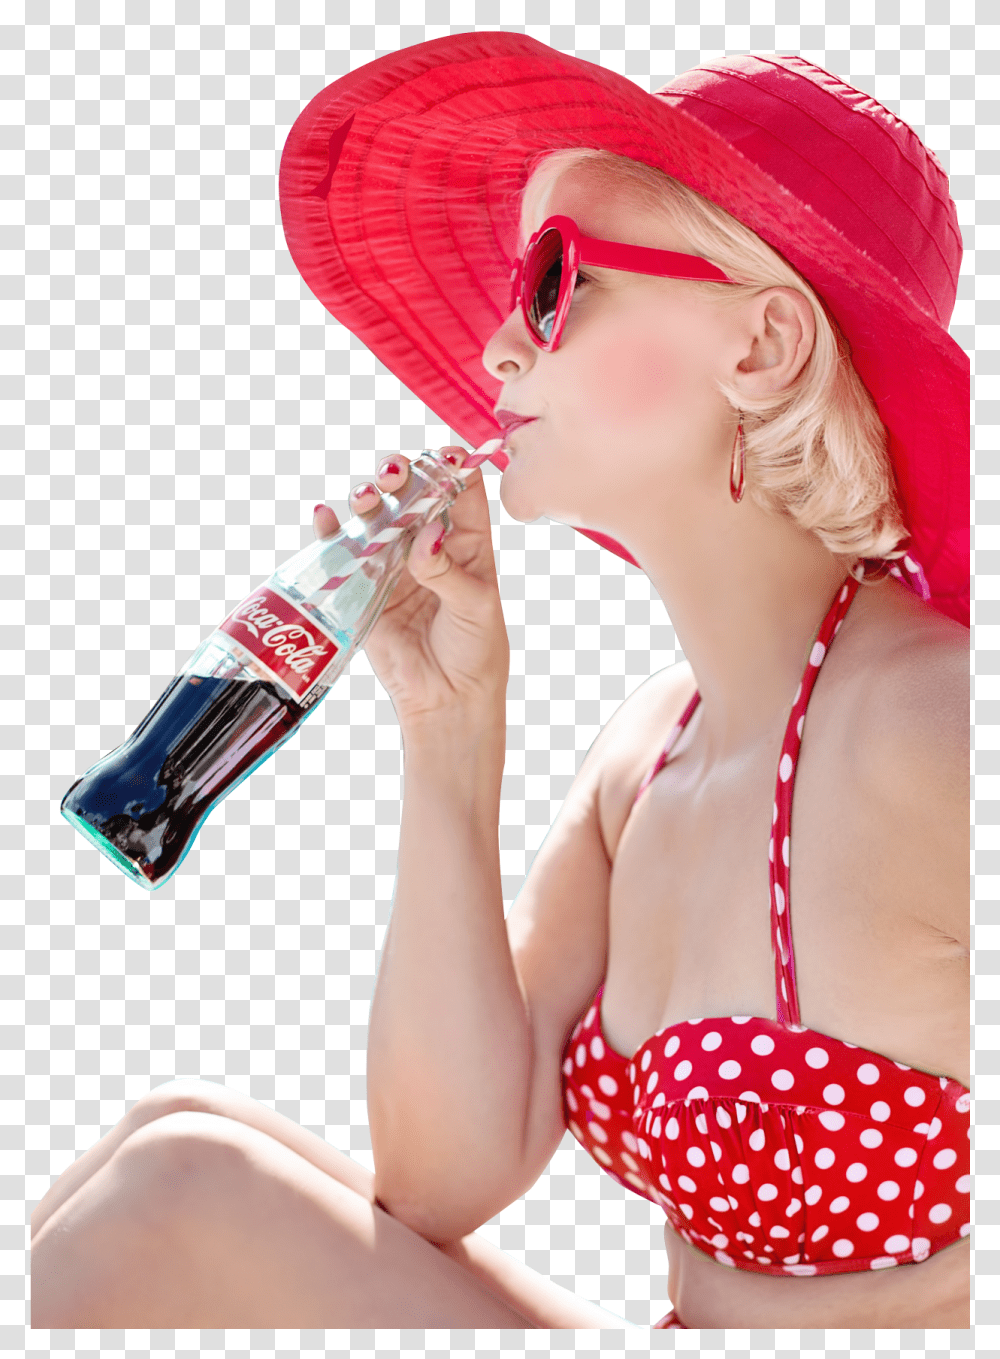 Sexy Woman Drinking Coca Cola Drink, Clothing, Apparel, Sunglasses, Accessories Transparent Png